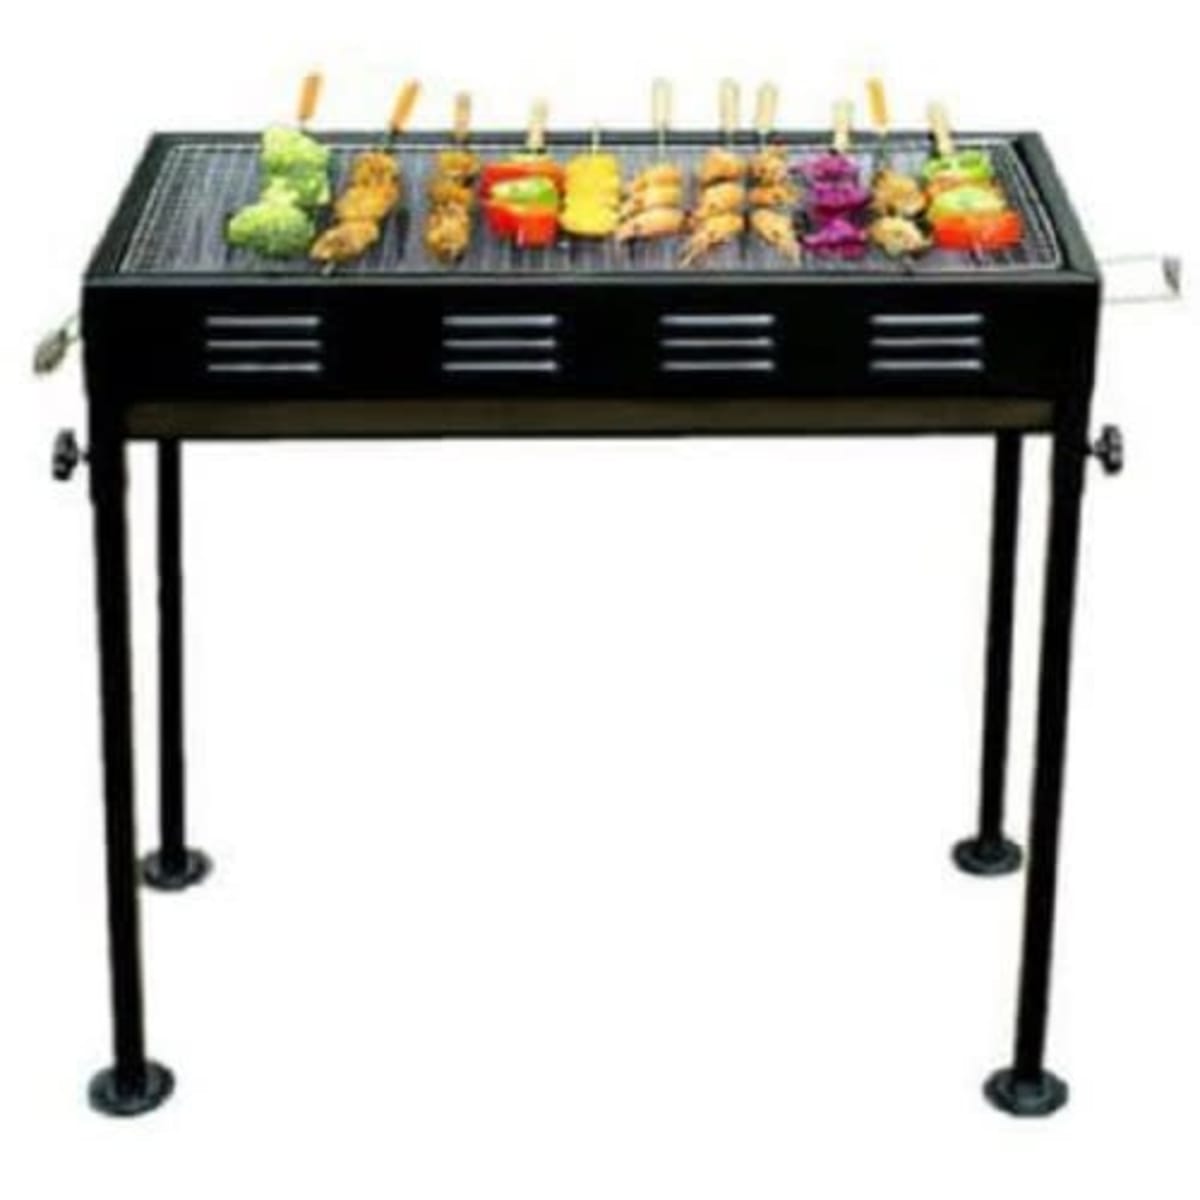 Charcoal Barbecue Grill + Electric Grill + Free Sanitizer